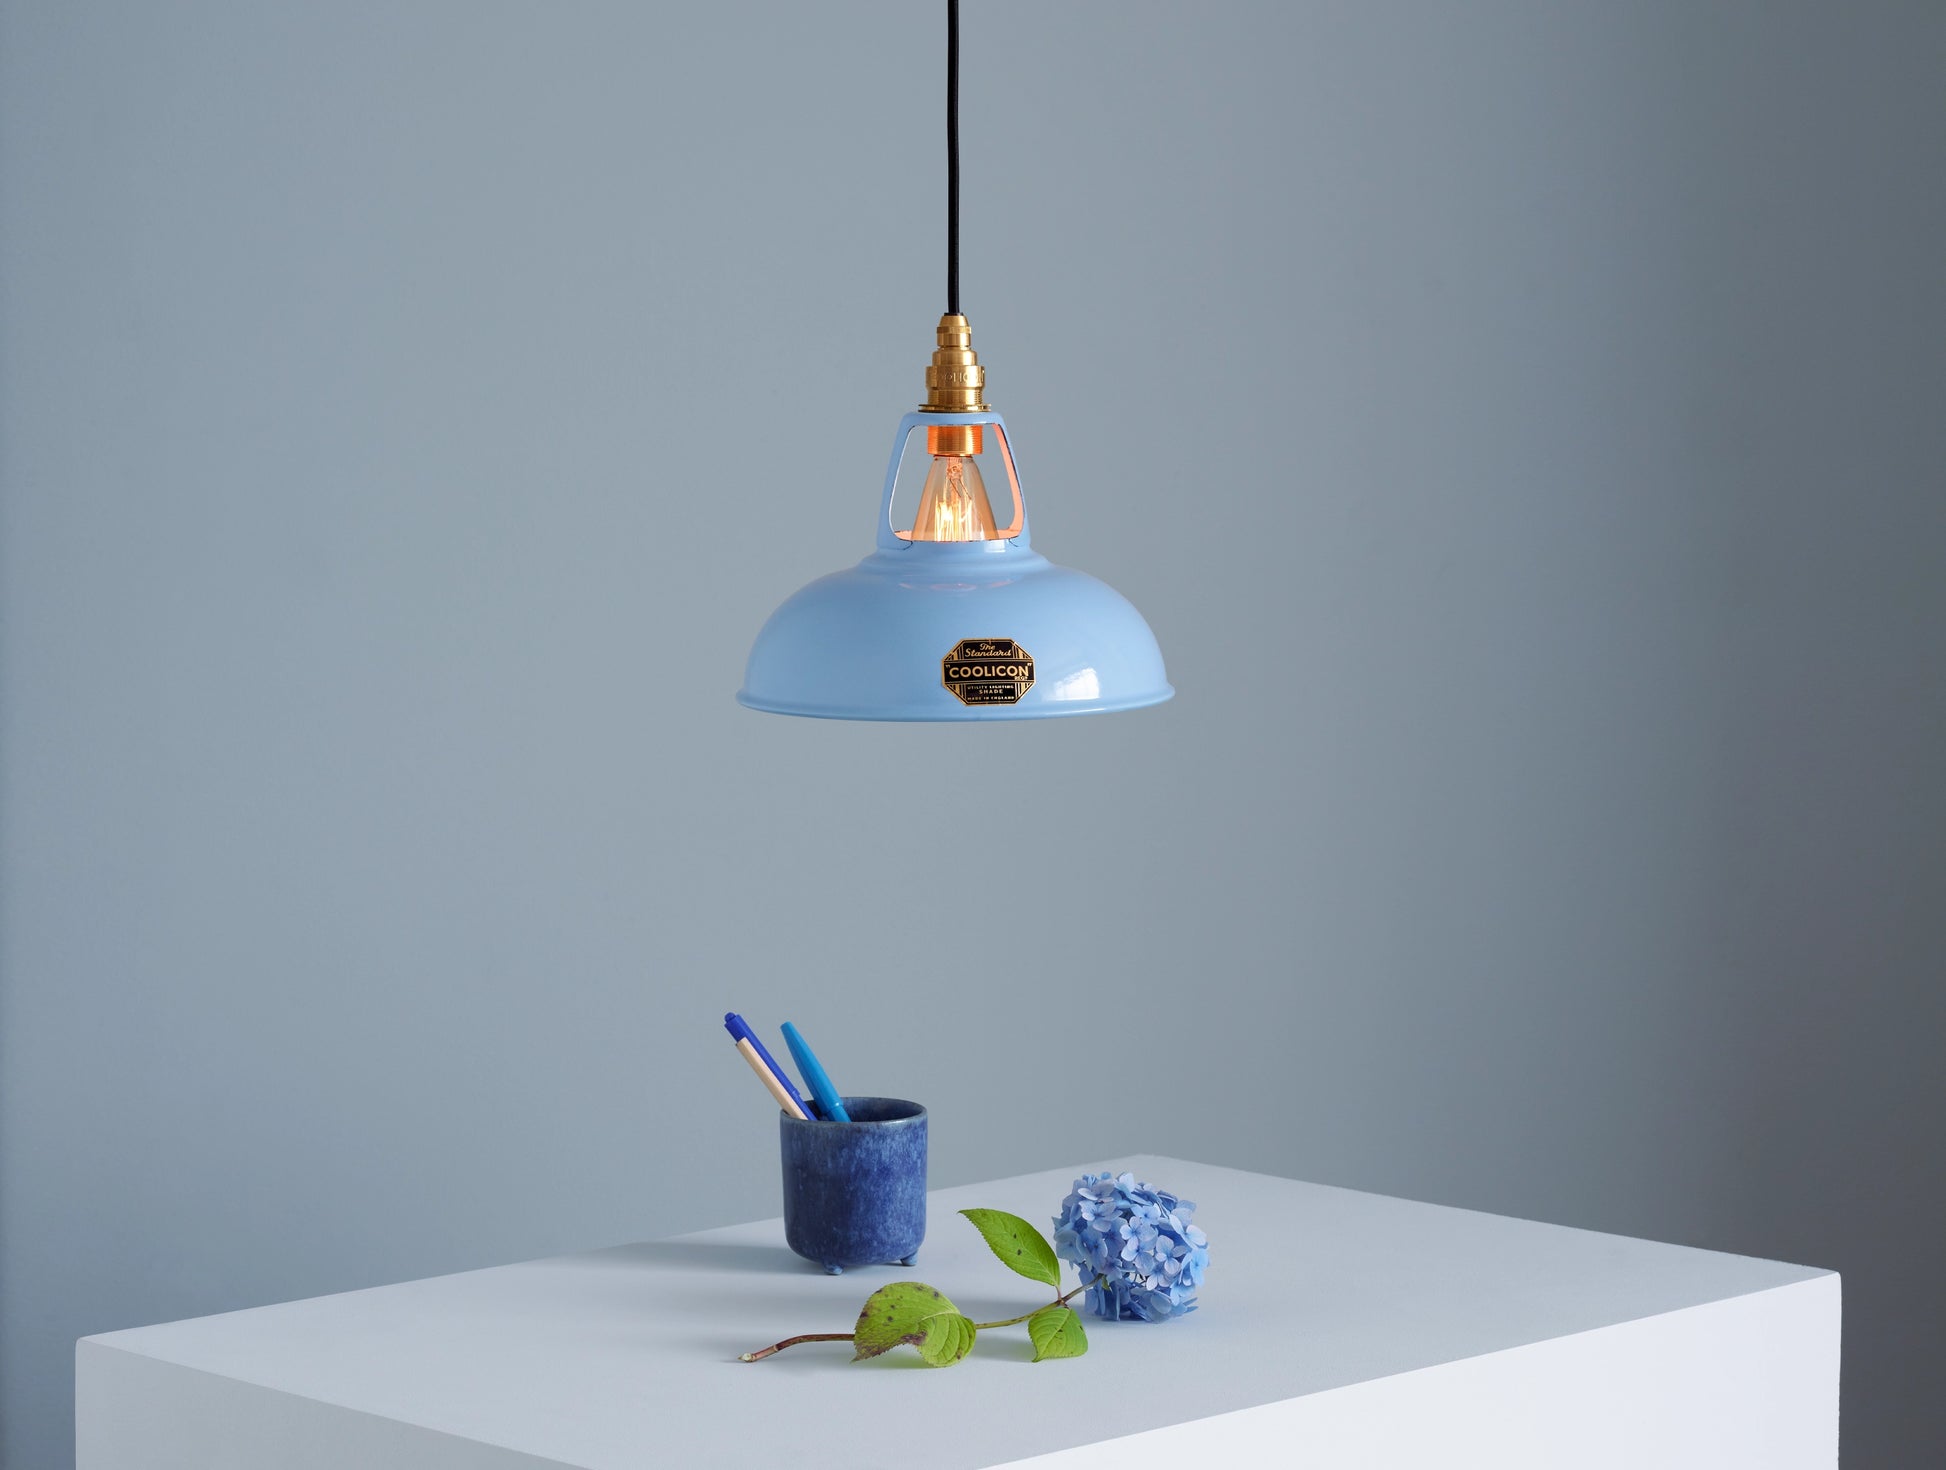 A Coolicon Sky Blue lampshade with a Porcelain pendant set hanging above a plinth with a blue hydrangea flower and a dark blue pencil cup containing two blue pens